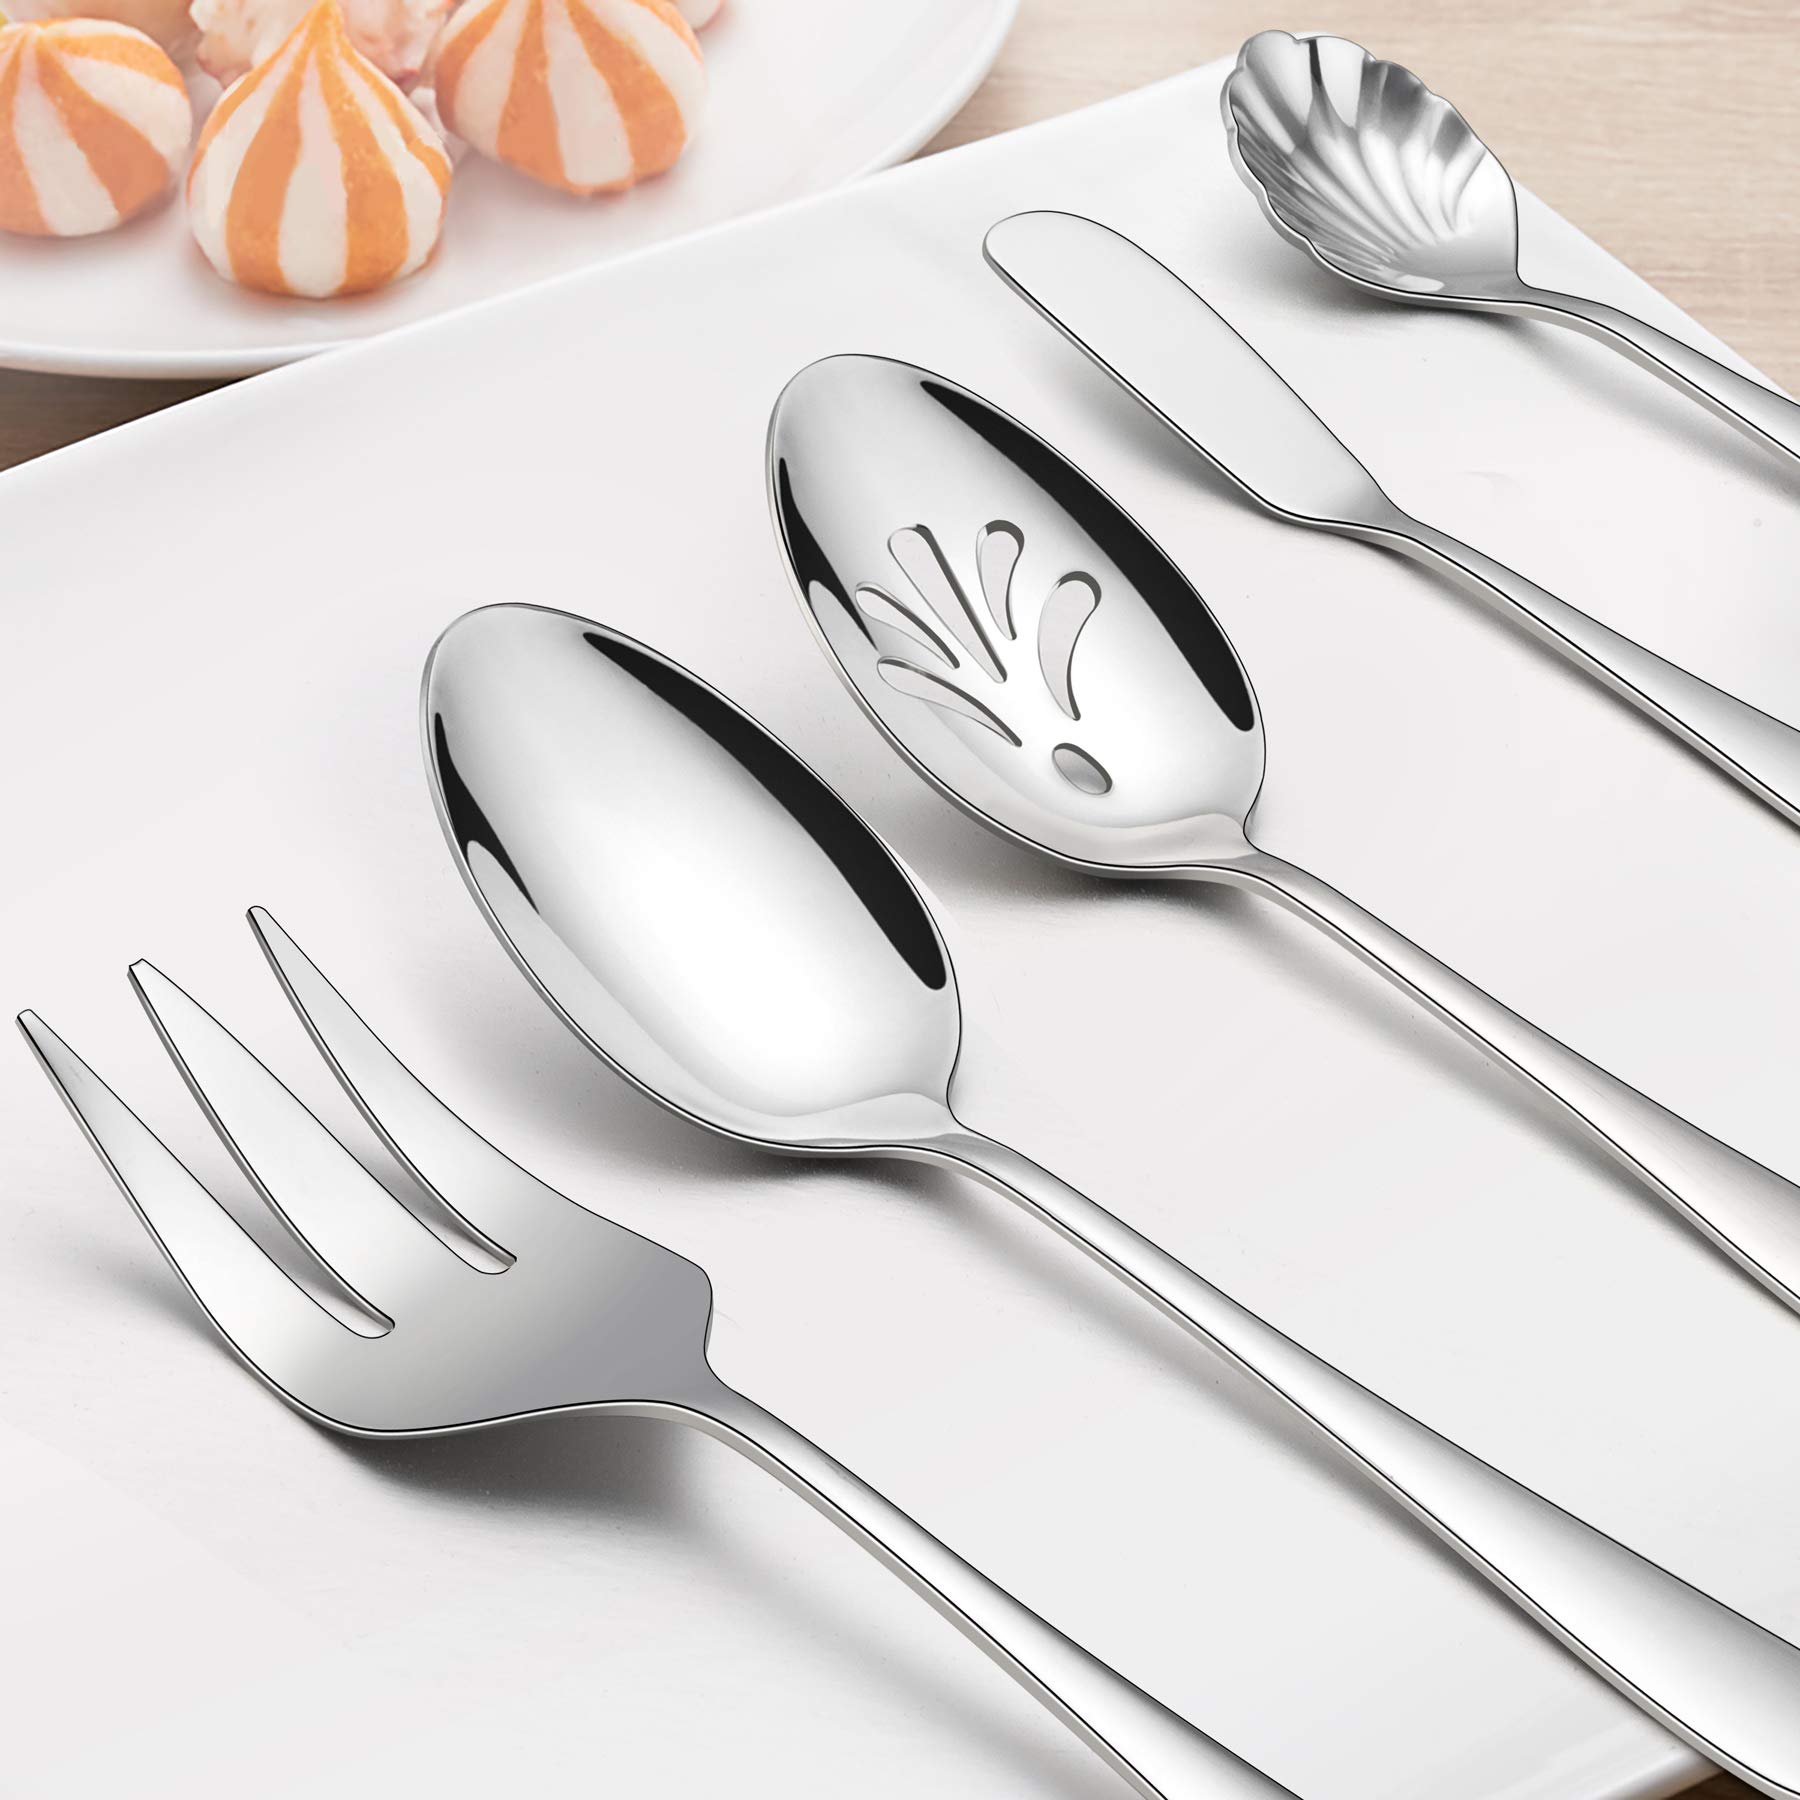 LIANYU Serving Utensils, 5 Pieces Stainless Steel Hostess Silverware Flatware Cutlery Serving Set, Mirror Finished, Dishwasher Safe